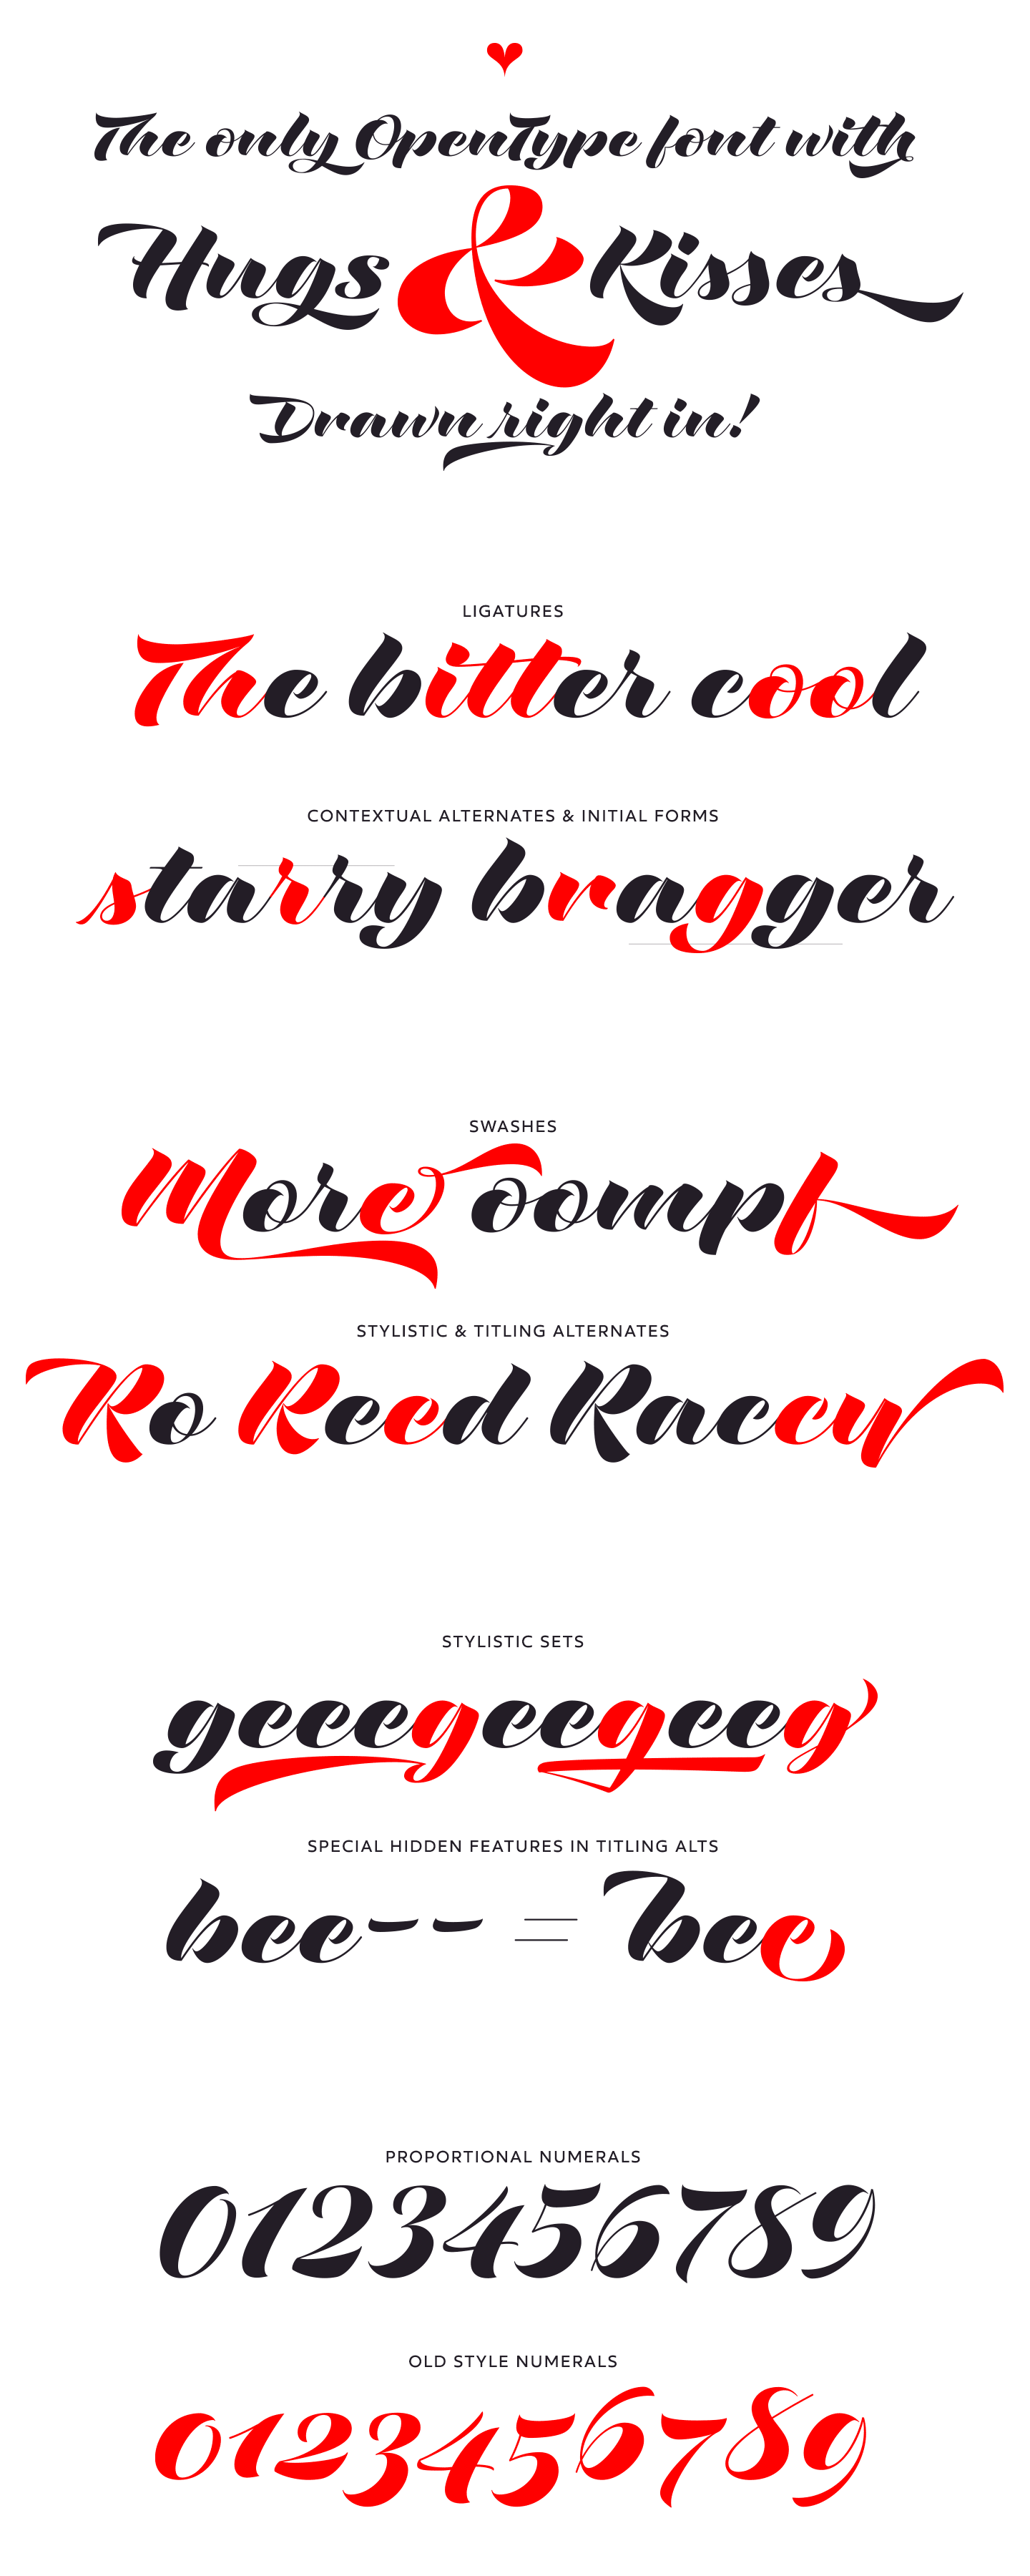 The diverse OpenType features of the Love Script typeface.